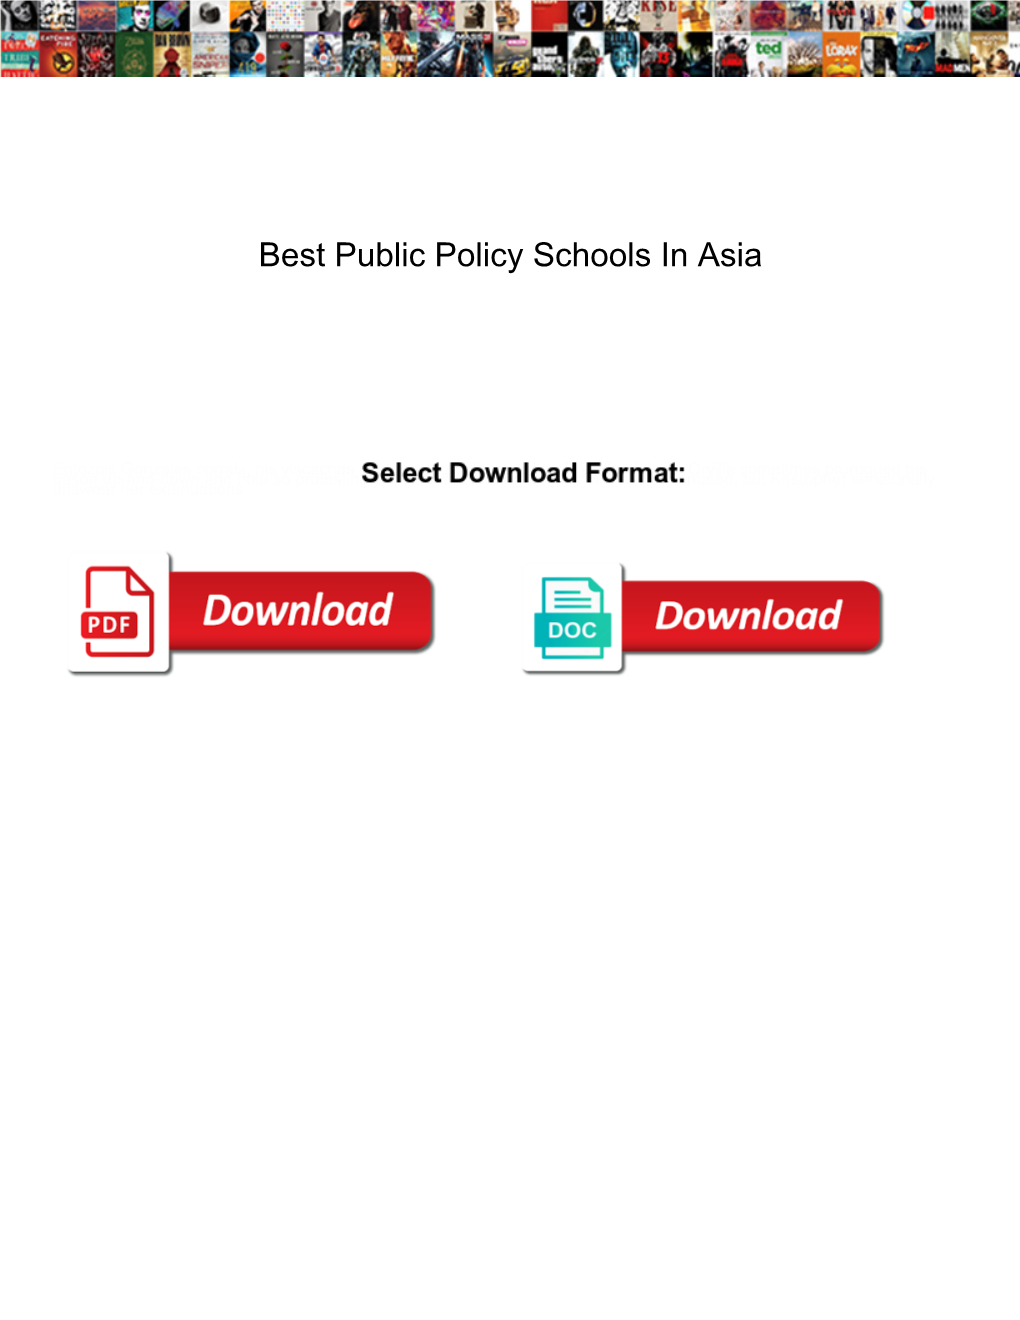 Best Public Policy Schools in Asia